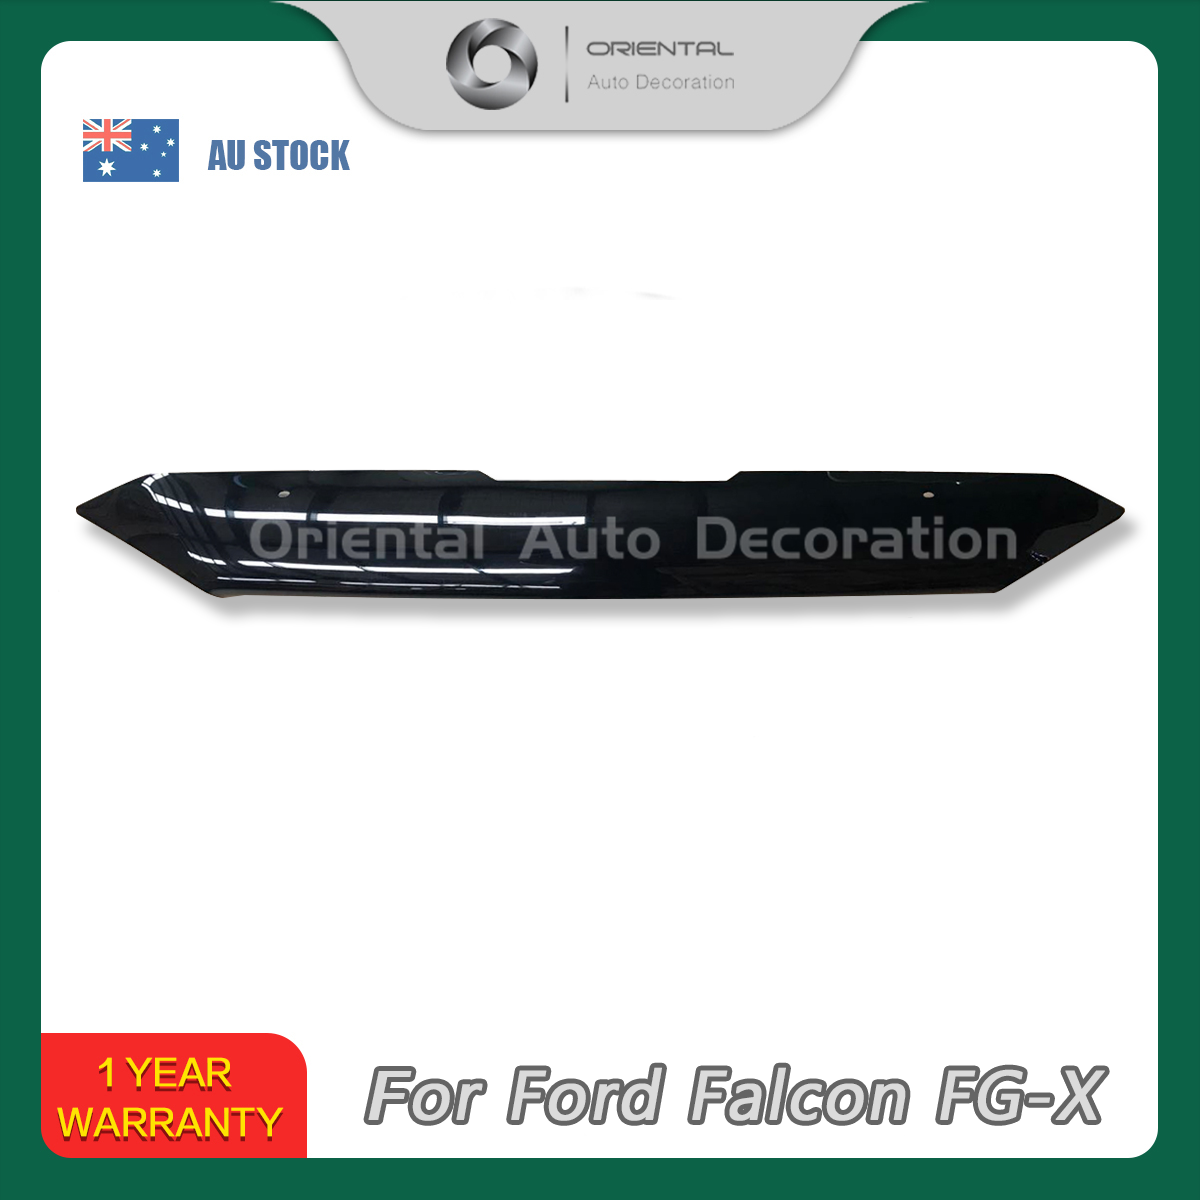 PICK UP ONLY!!! Bonnet Protector for Ford Falcon FG-X 14-16 model #BC